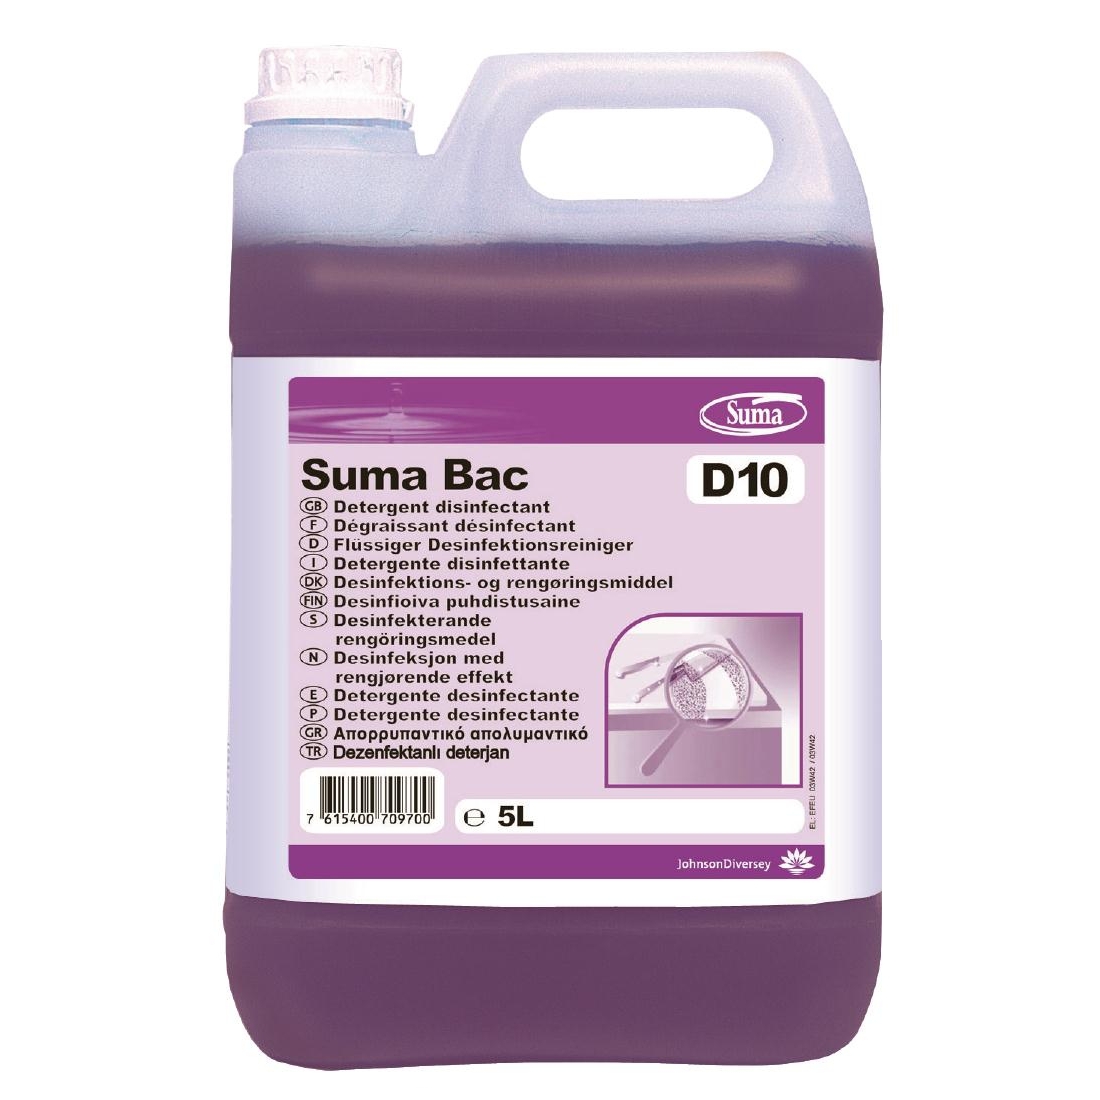 Suma Bac D10 Cleaner and Sanitiser 5 Litre (Pack of 2)